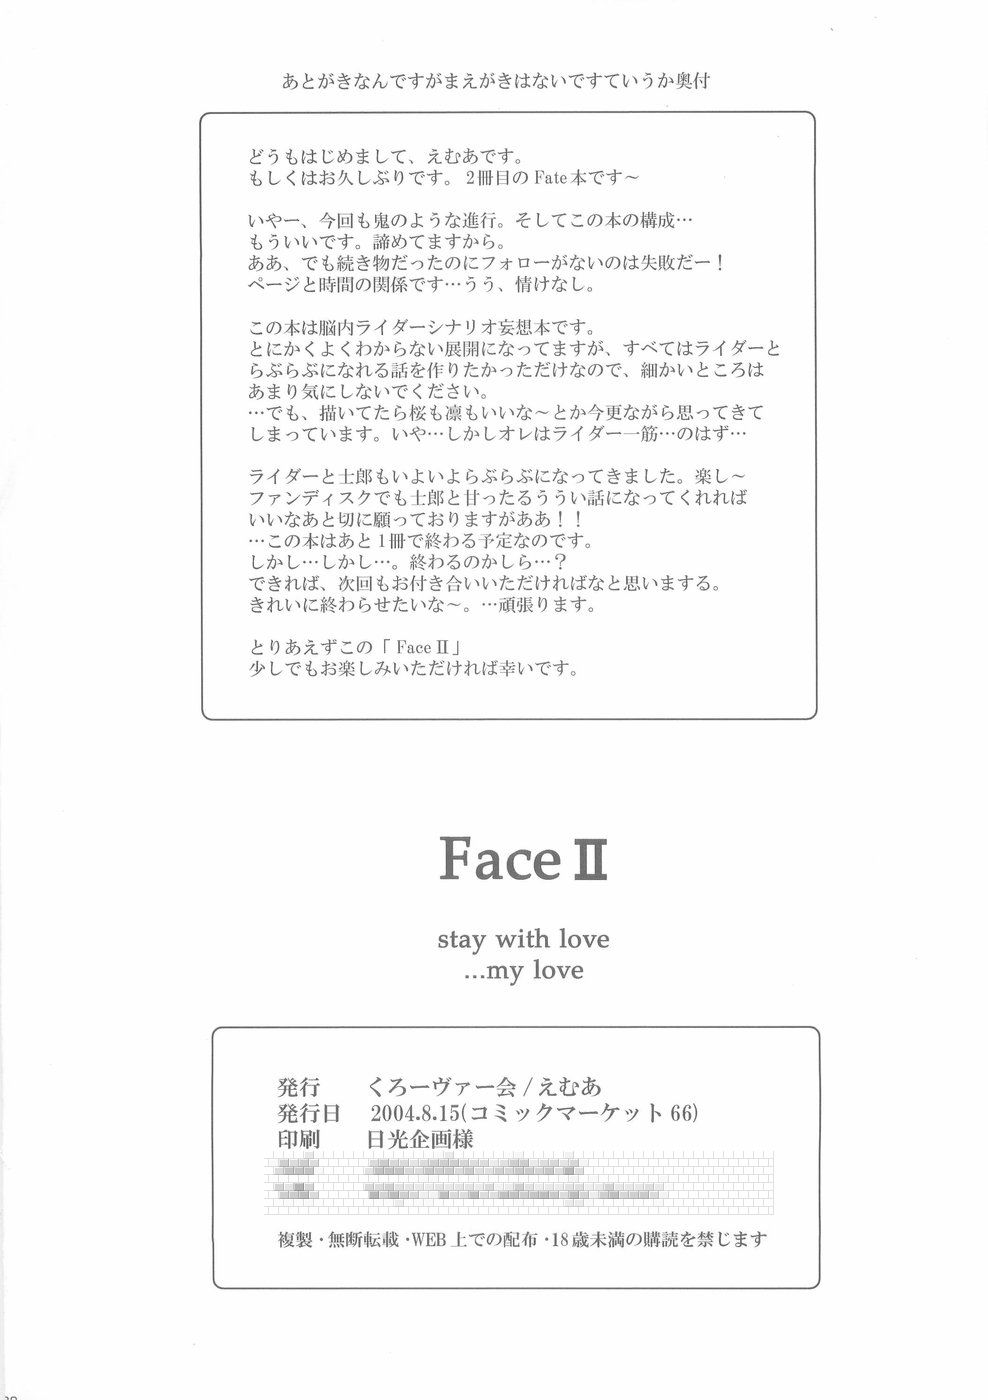 (C66) [くろーヴァー会 (えむあ)] FaceII stay with my love (Fate/stay night)